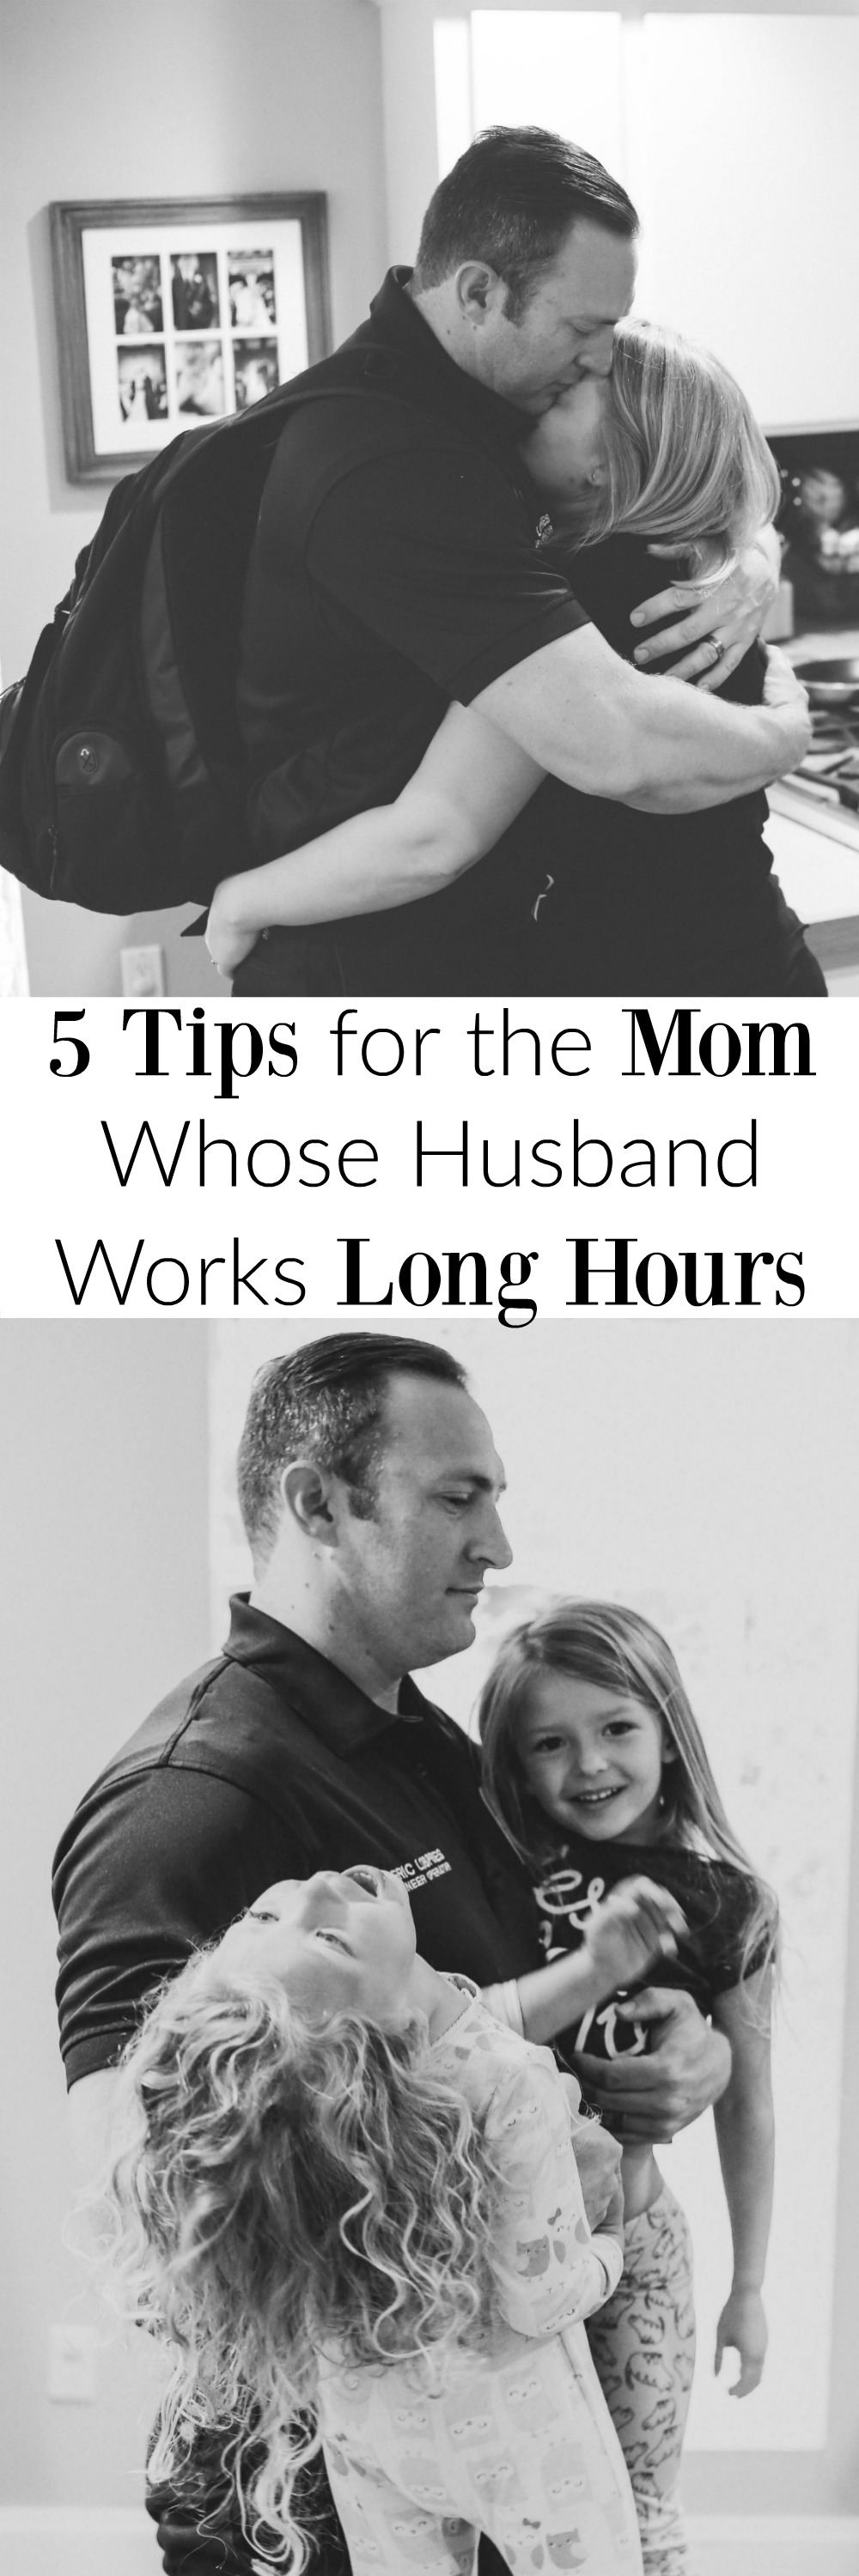 5 Tips for the Mom Whose Husband Works Long Hours- this is such an encouraging read. When your husband works long hours it can sometime feel isolating with the kids. This reminds me I am not alone.